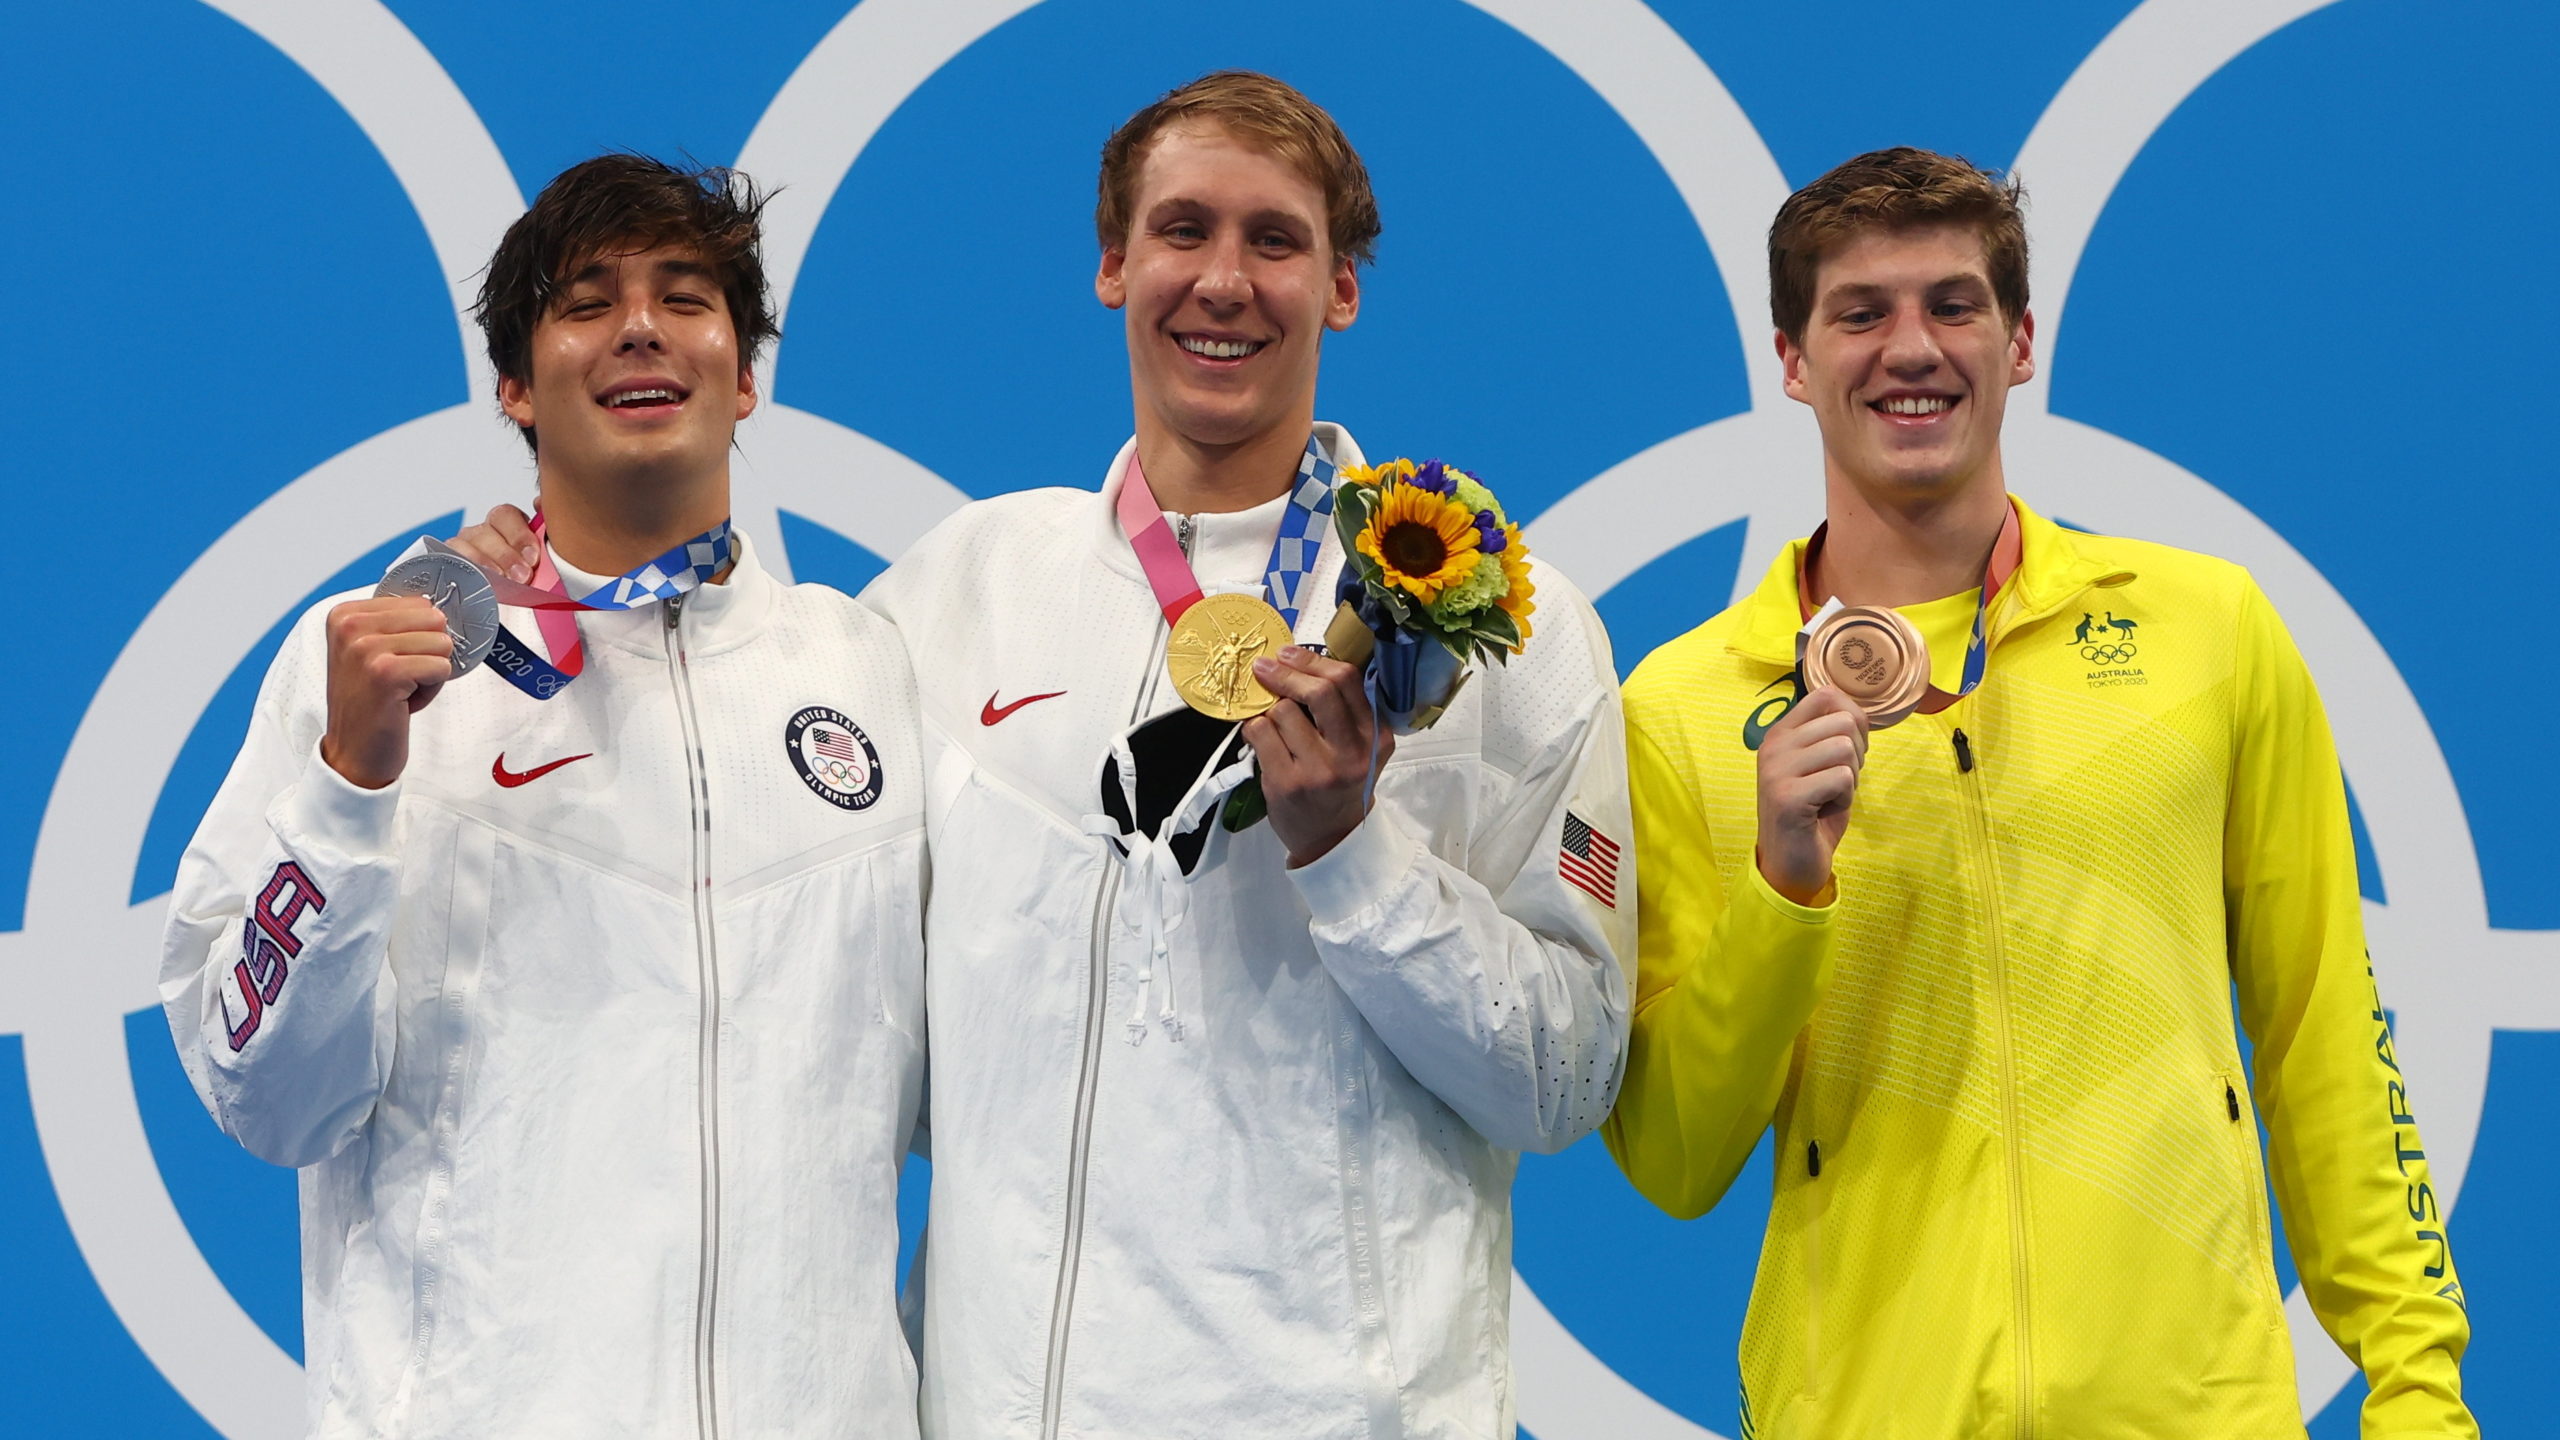 Tokyo 2020 Olympics - Swimming - Men's 400m Individual Medley - Medal Ceremony - Tokyo Aquatics Centre - Tokyo, Japan - July 25, 2021. Gold medalist Chase Kalisz of the United States, silver medalist Jay Litherland of the United States and bronze medalist Brendon Smith of Australia pose on the podium 